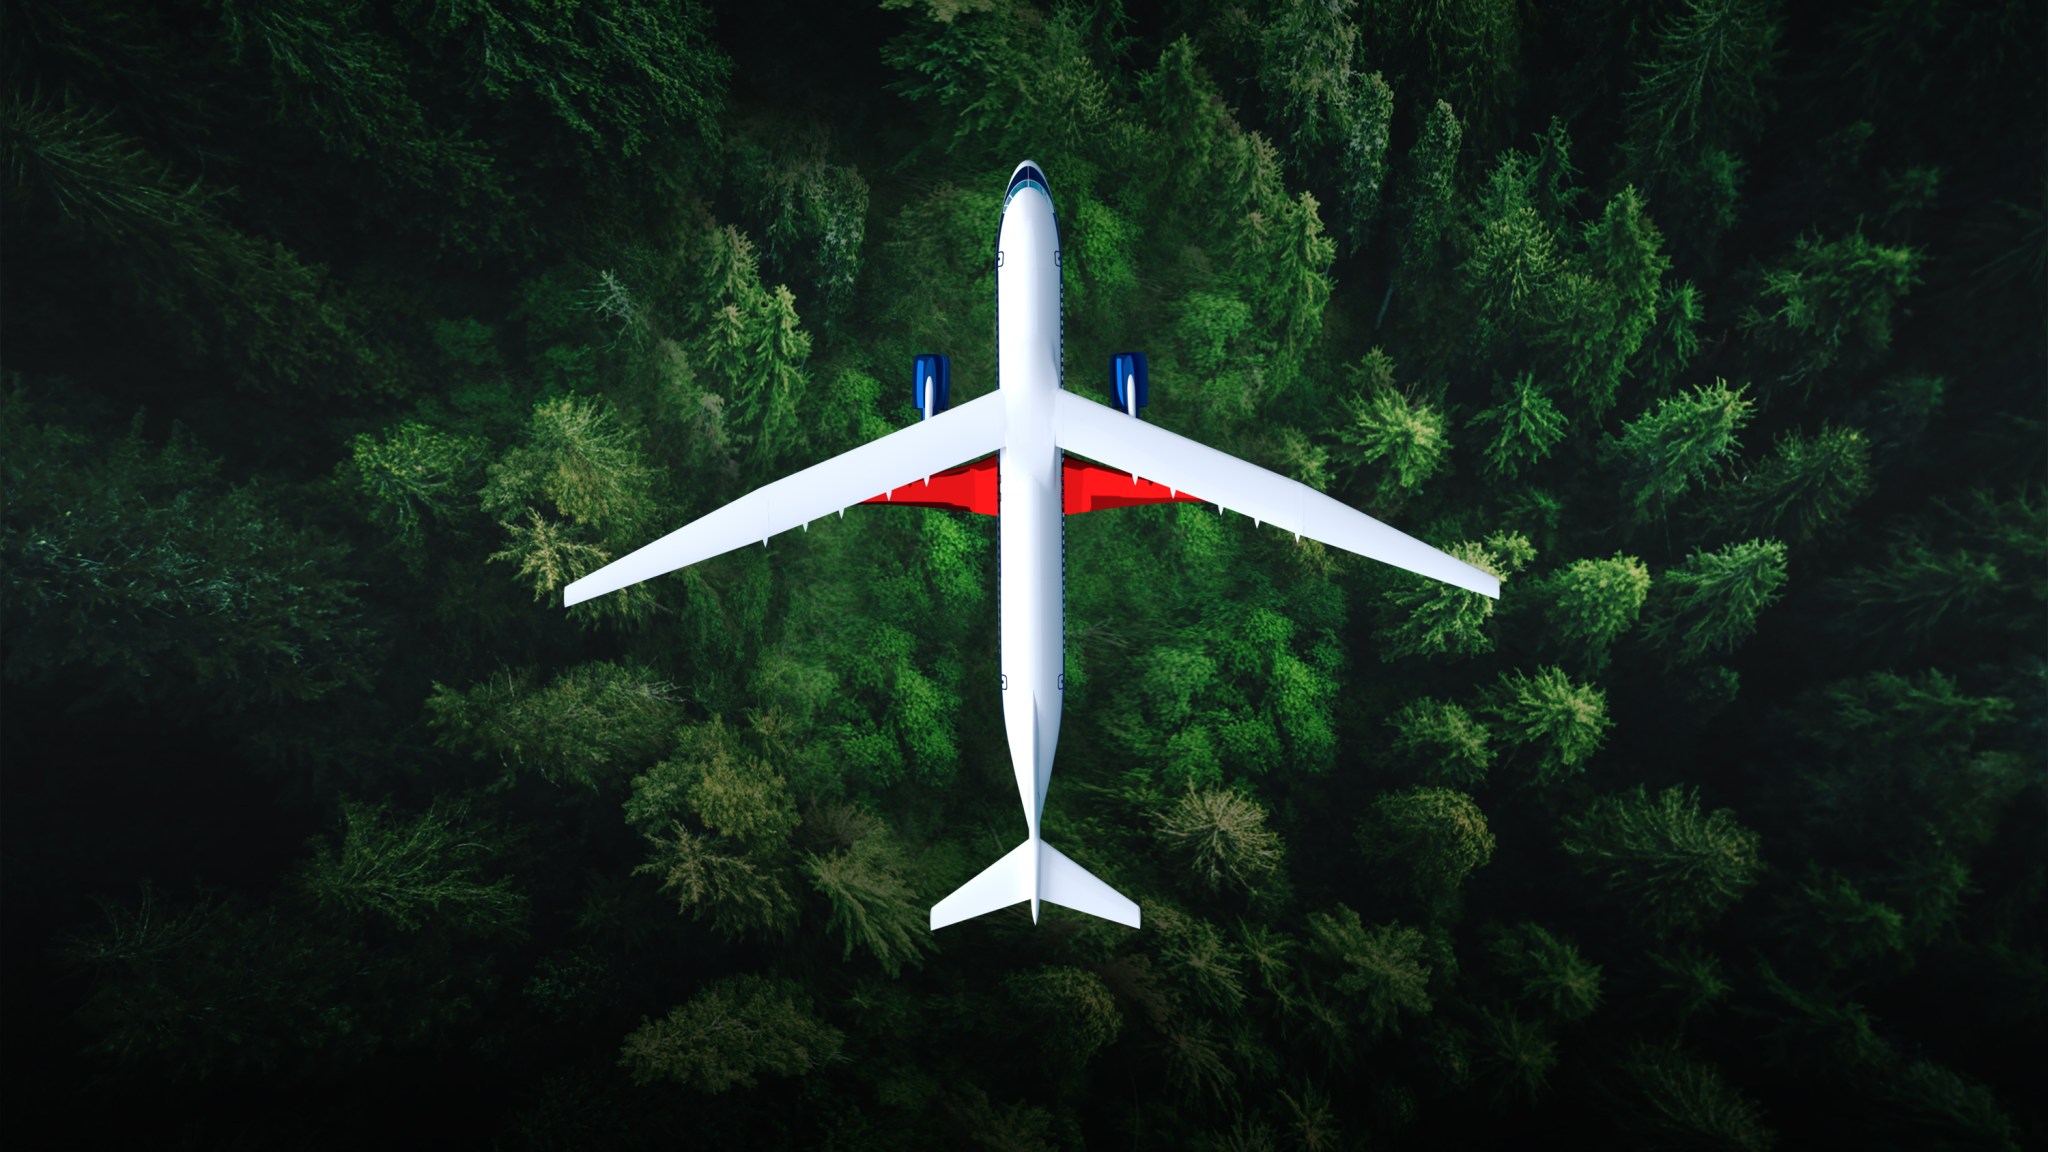 Artist illustration of an aerial view of the Transonic Truss-Braced Wing aircraft in flight above a forest of green trees.